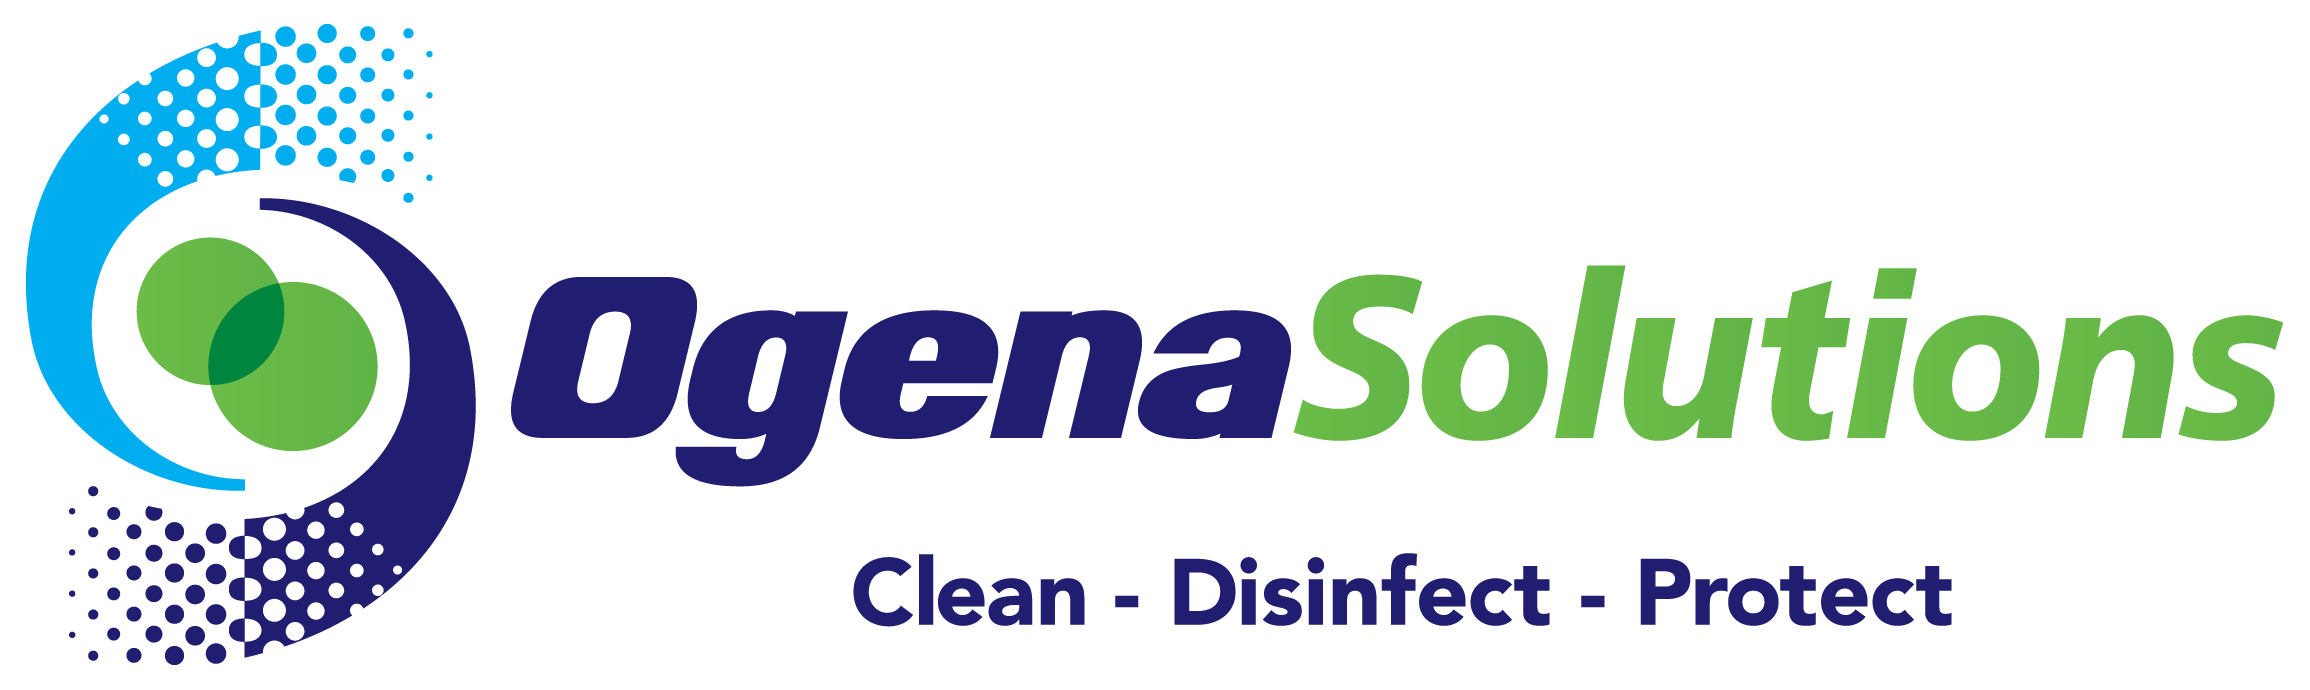 Ogena Solutions Canada Corp.